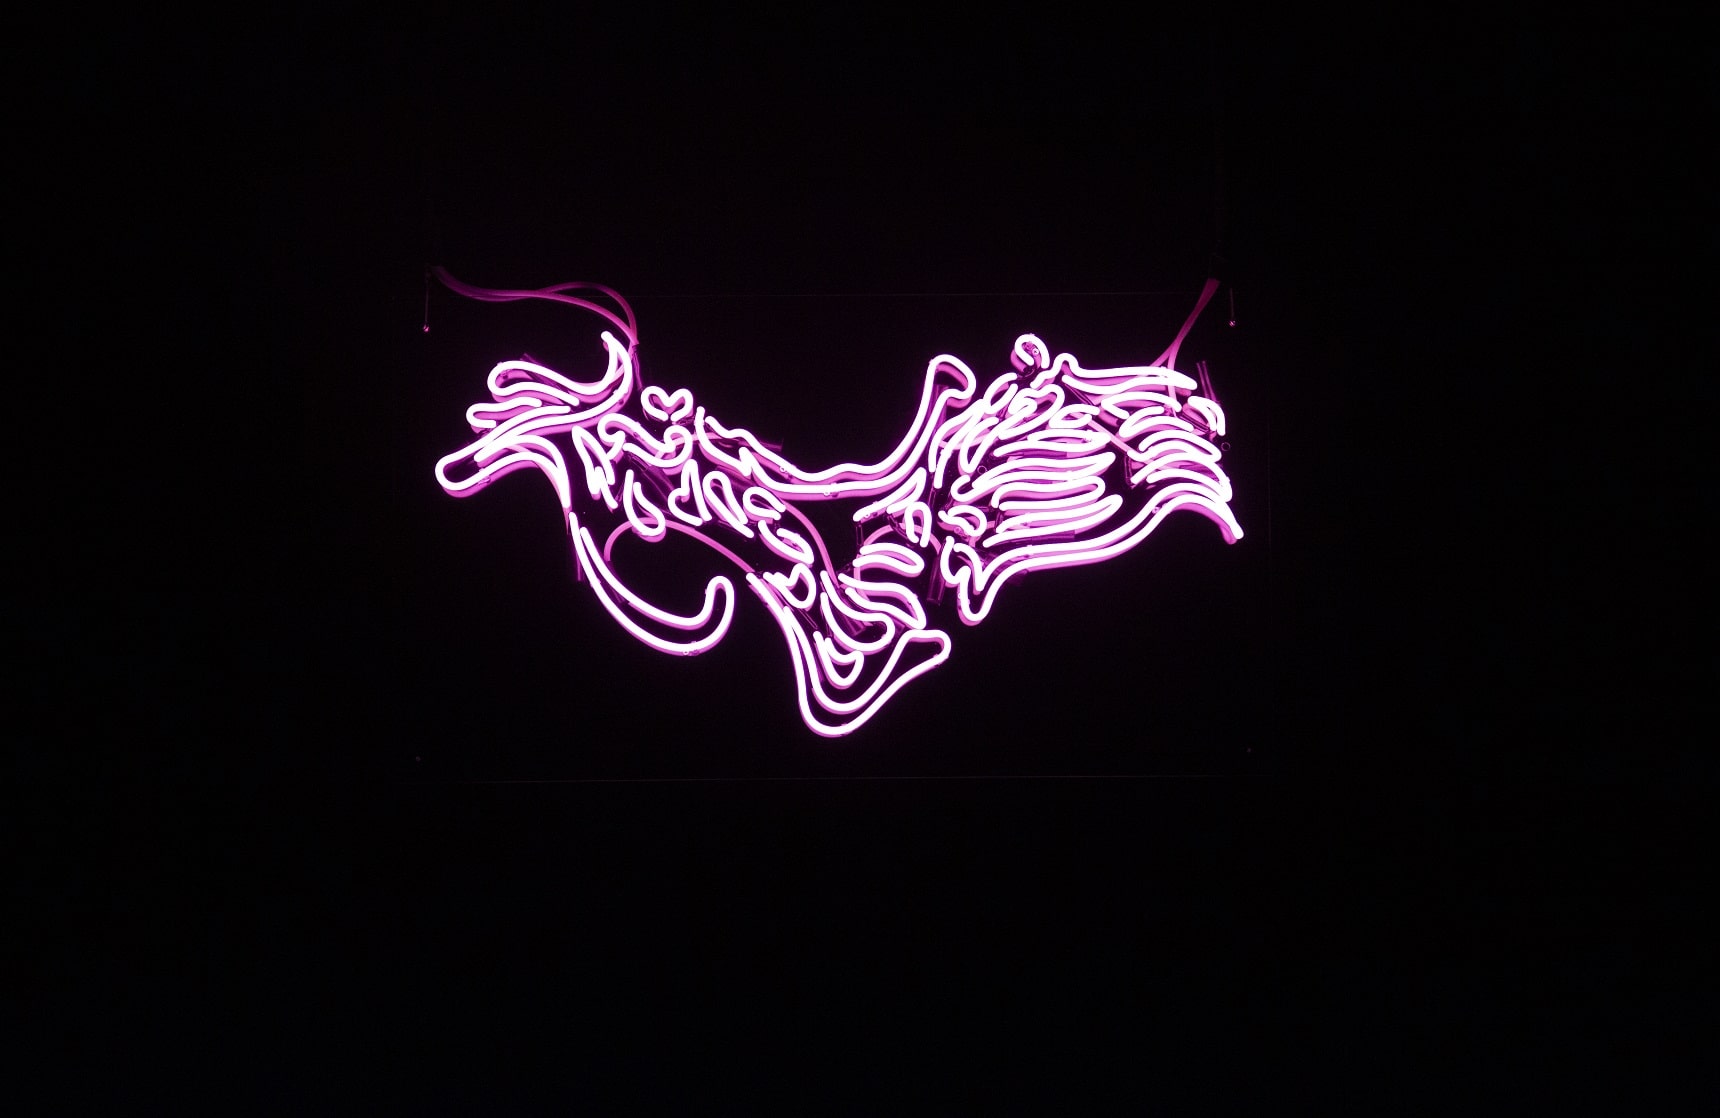 Hanging in the middle of a drak background a bright pink neon sign with distored Chinese characters which cast a pink glow.